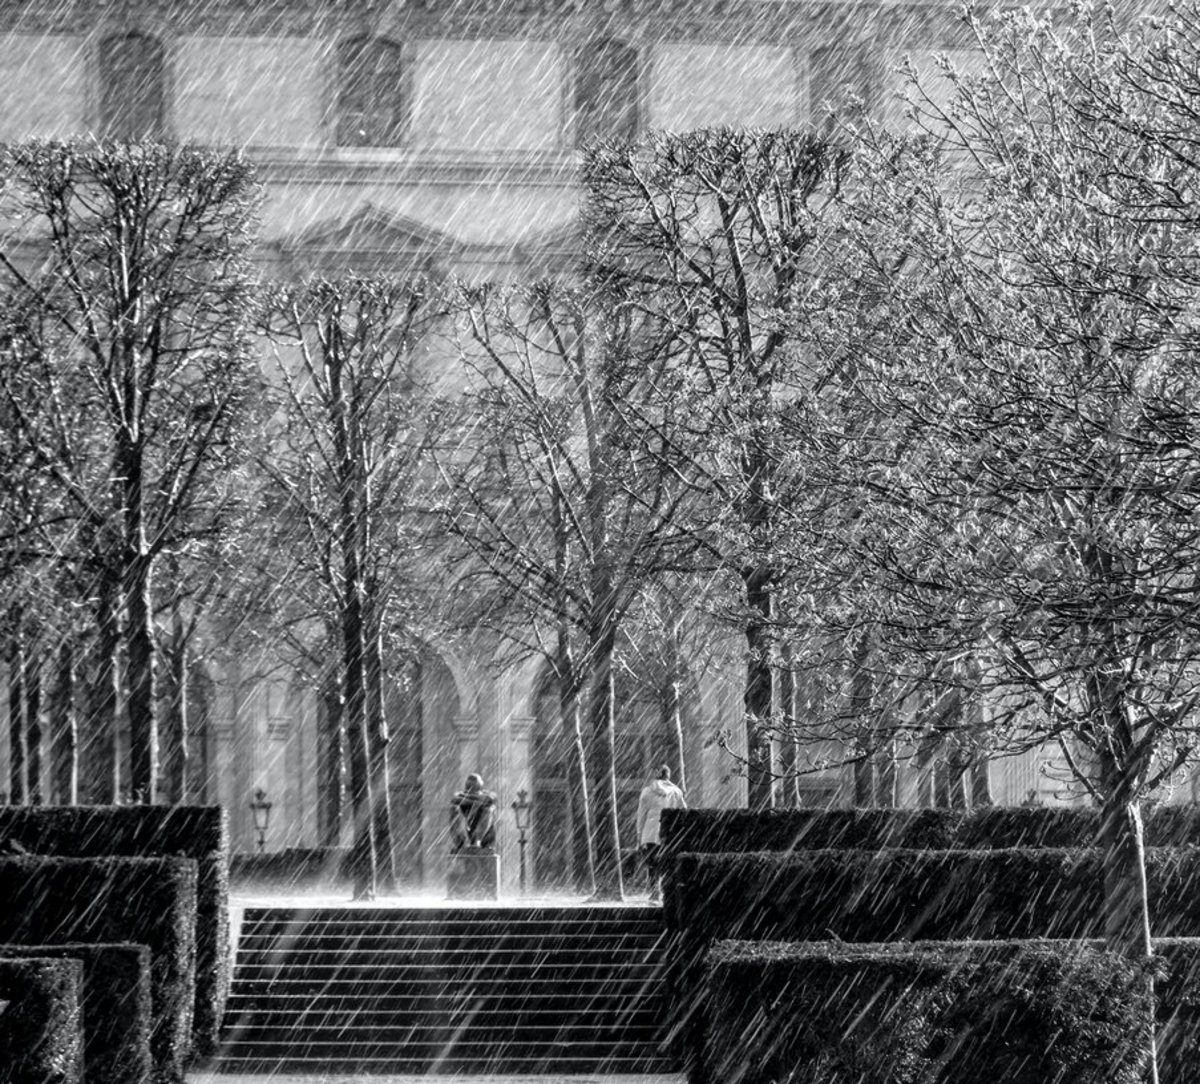 Black and white sleet storm really captures the feeling of how thoroughly miserable being caught in this spell would be.